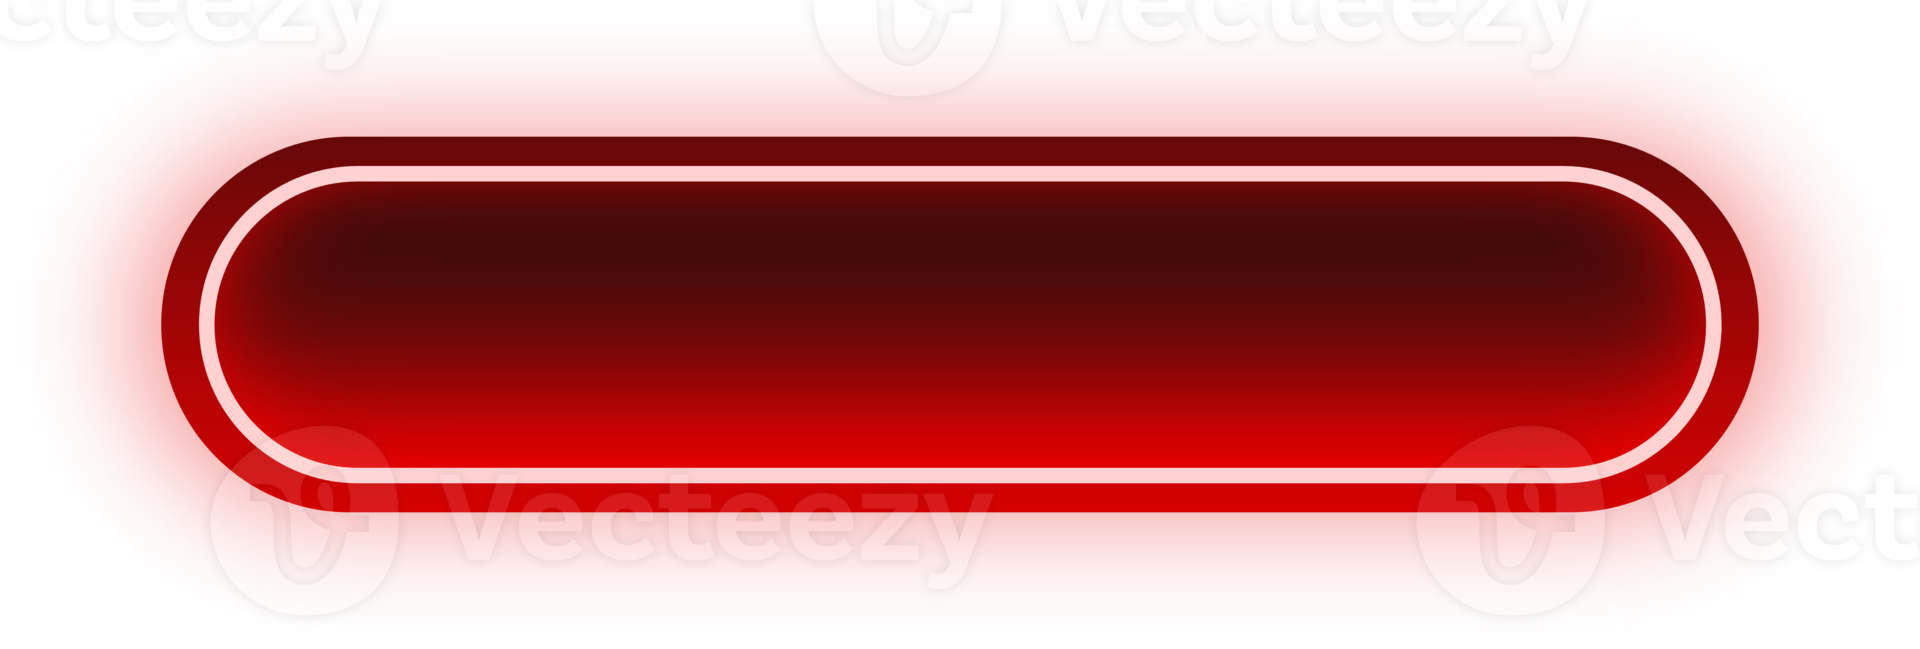 Red Neon Button, Glowing Neon Button png